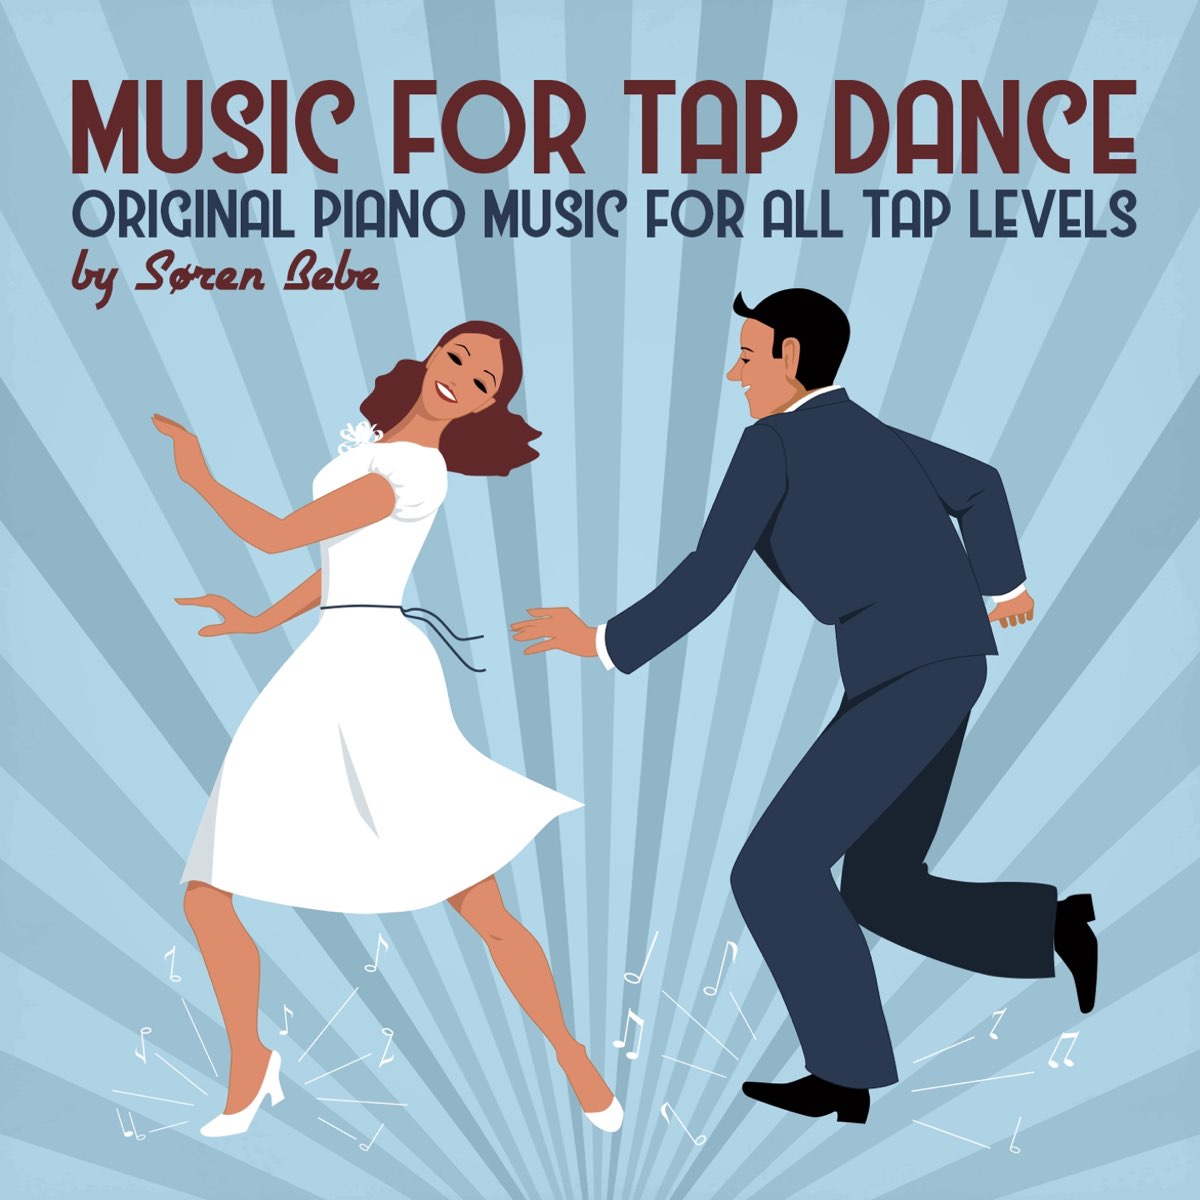 Music for Tap Dance (Piano Music for all Tap Levels) - Album by Søren Bebe  - Apple Music